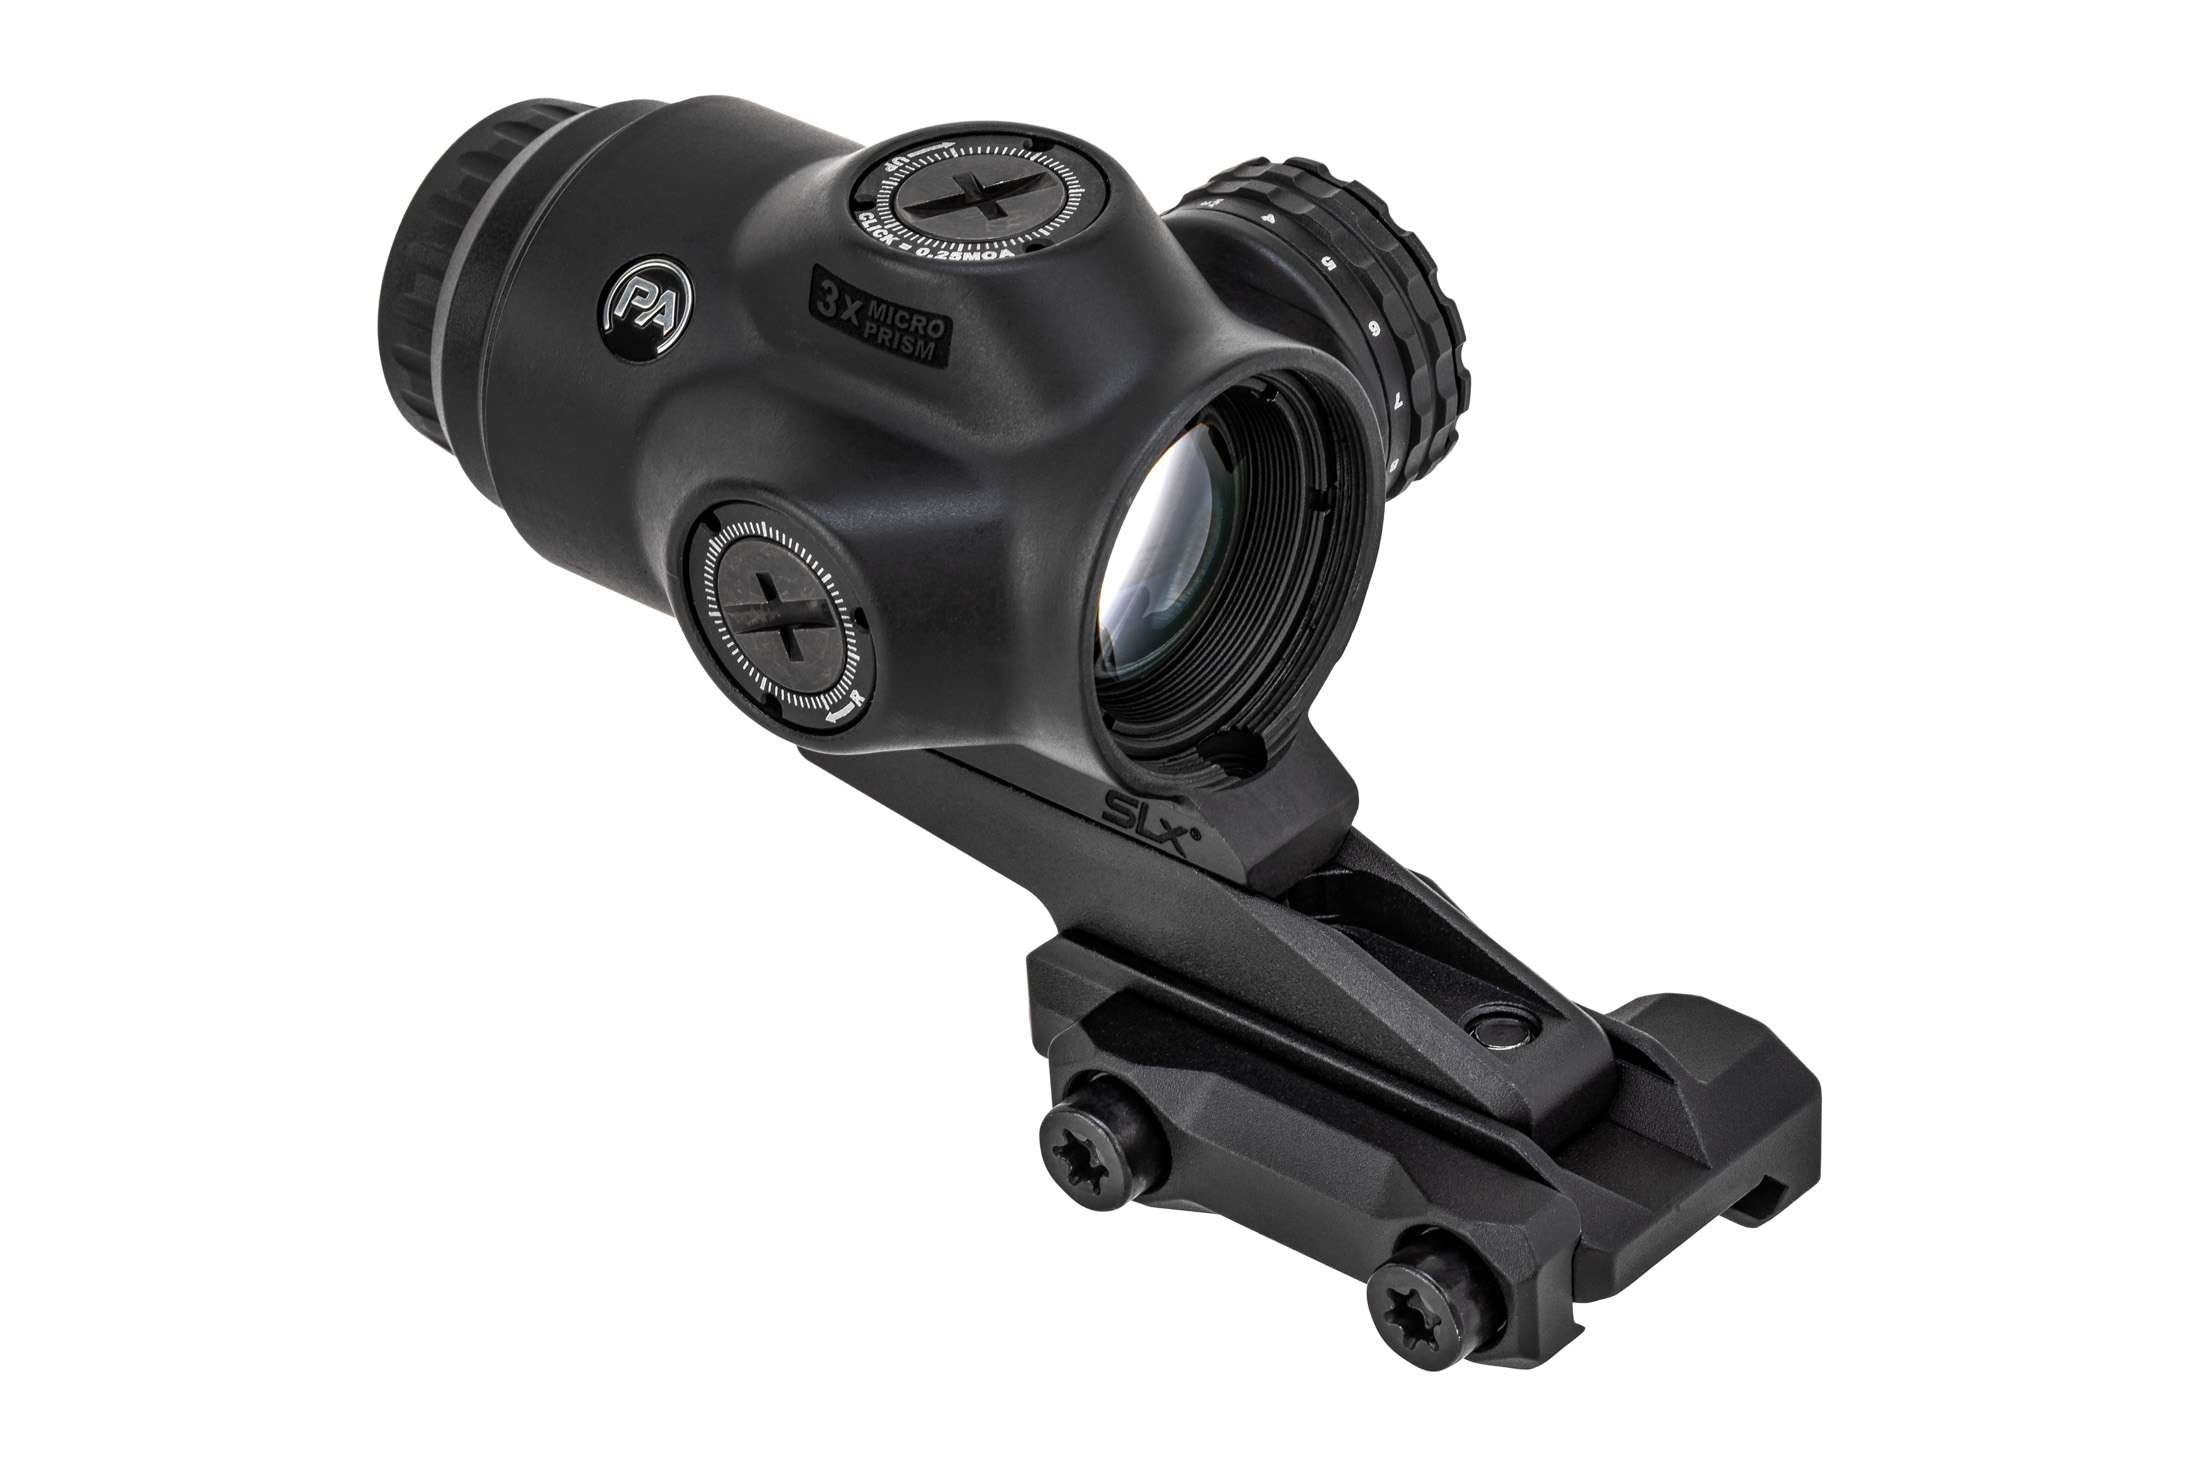 Primary Arms SLx 3X MicroPrism Scope - Green Illuminated ACSS Raptor Reticle - 5.56 / .308 - Yard